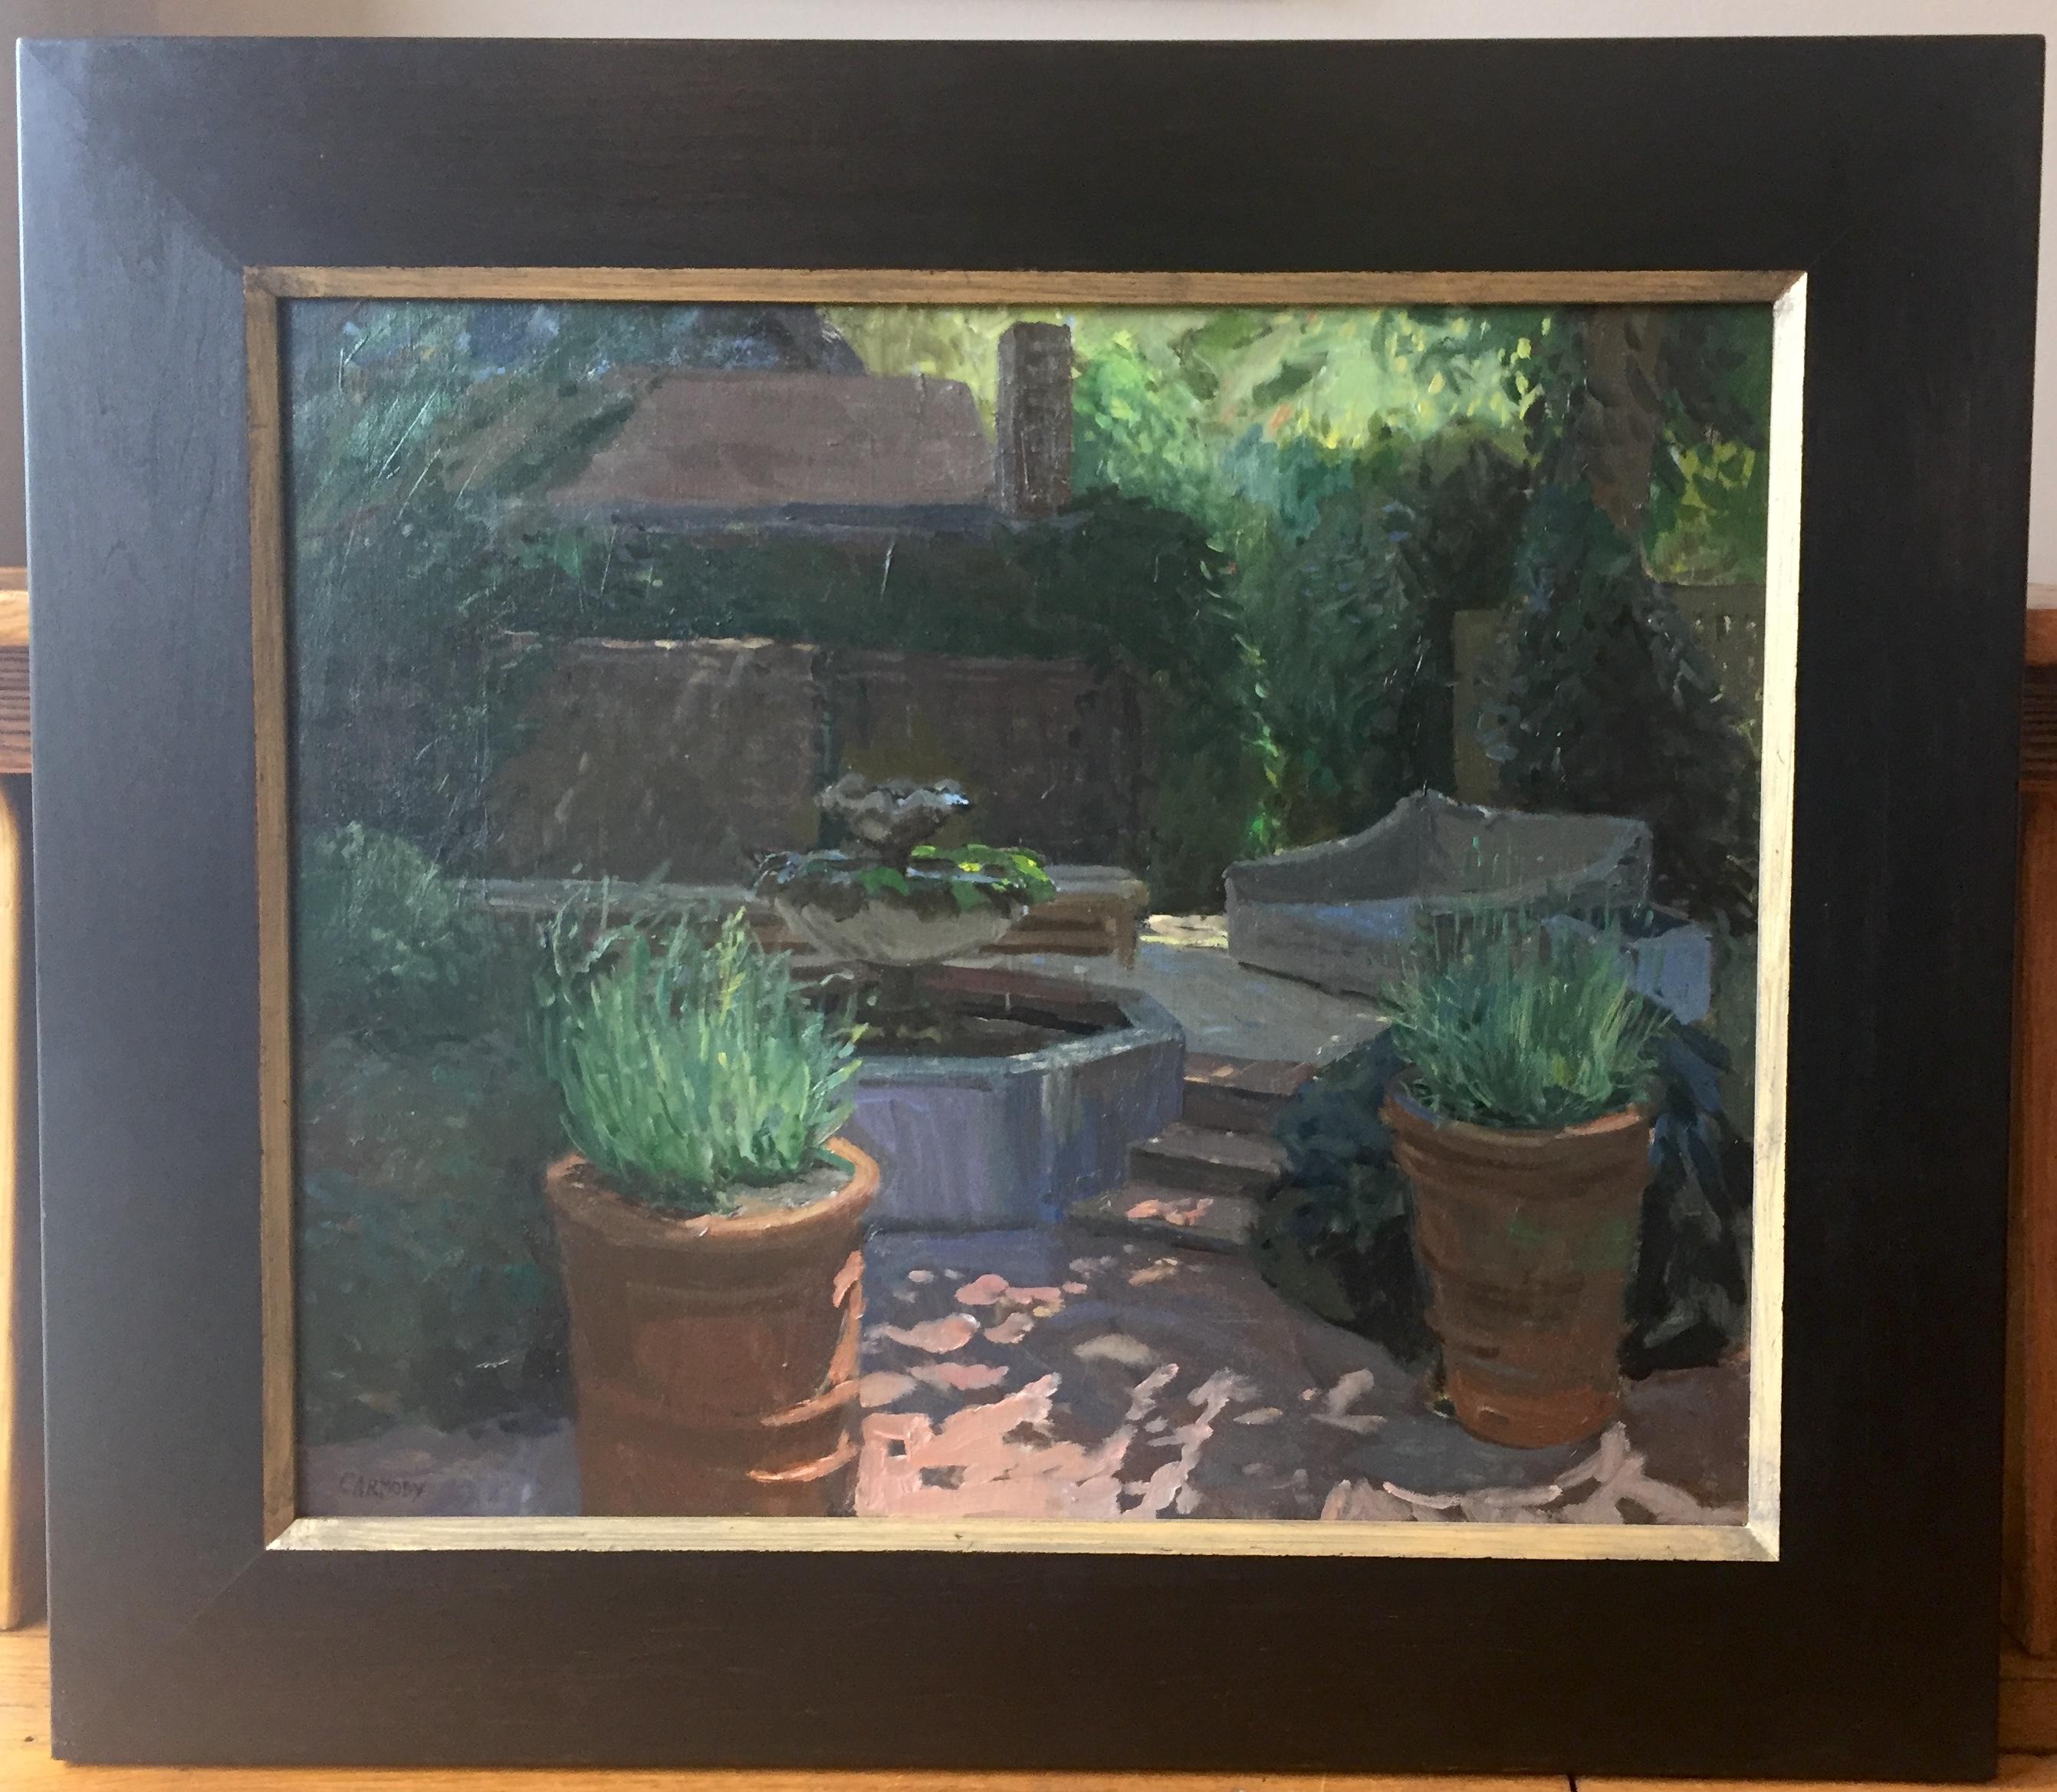 Blooms Garden - Painting by Kelly Carmody